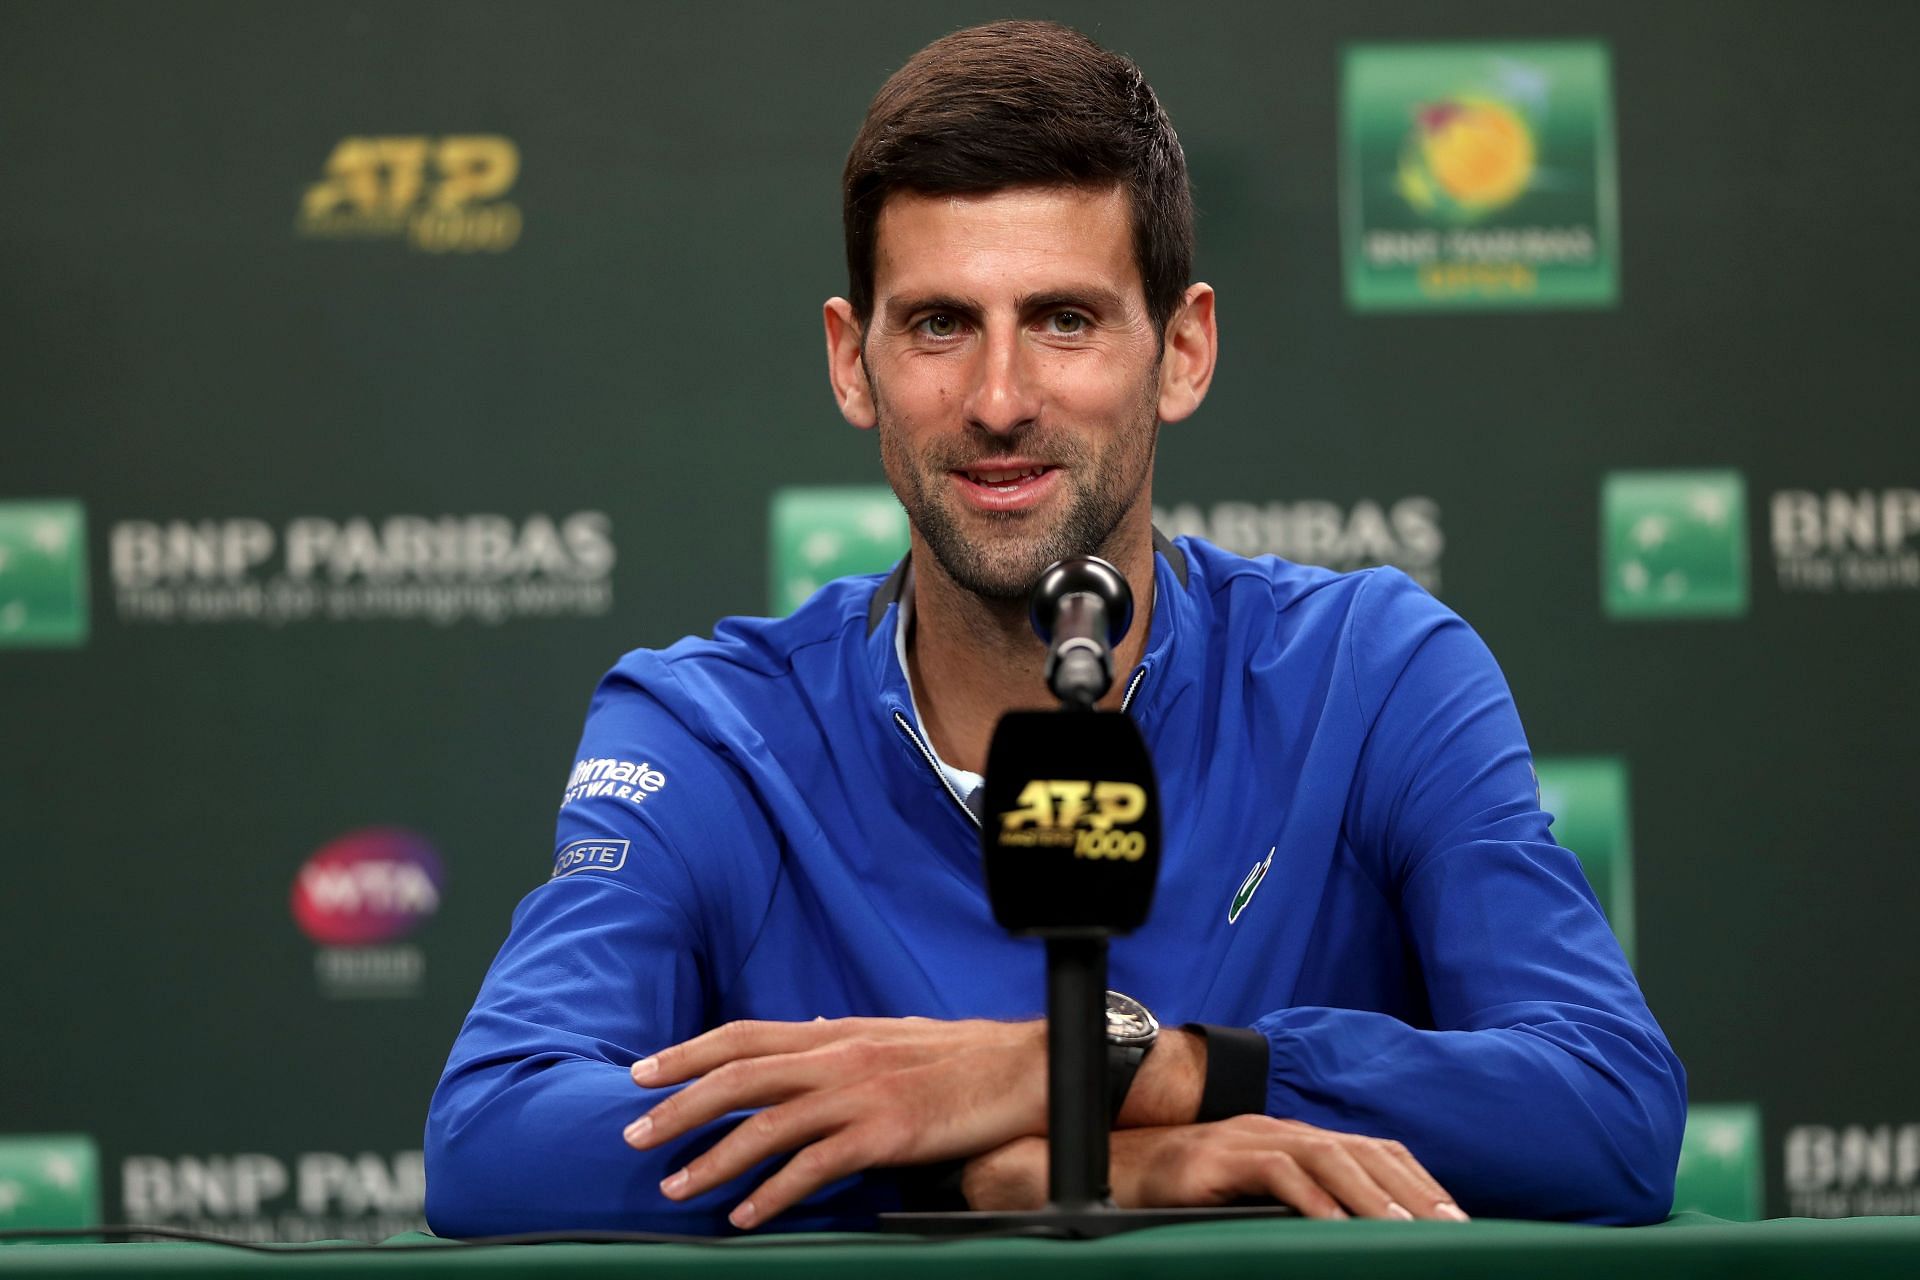 Novak Djokovic is confirmed to play at the Serbia Open in April